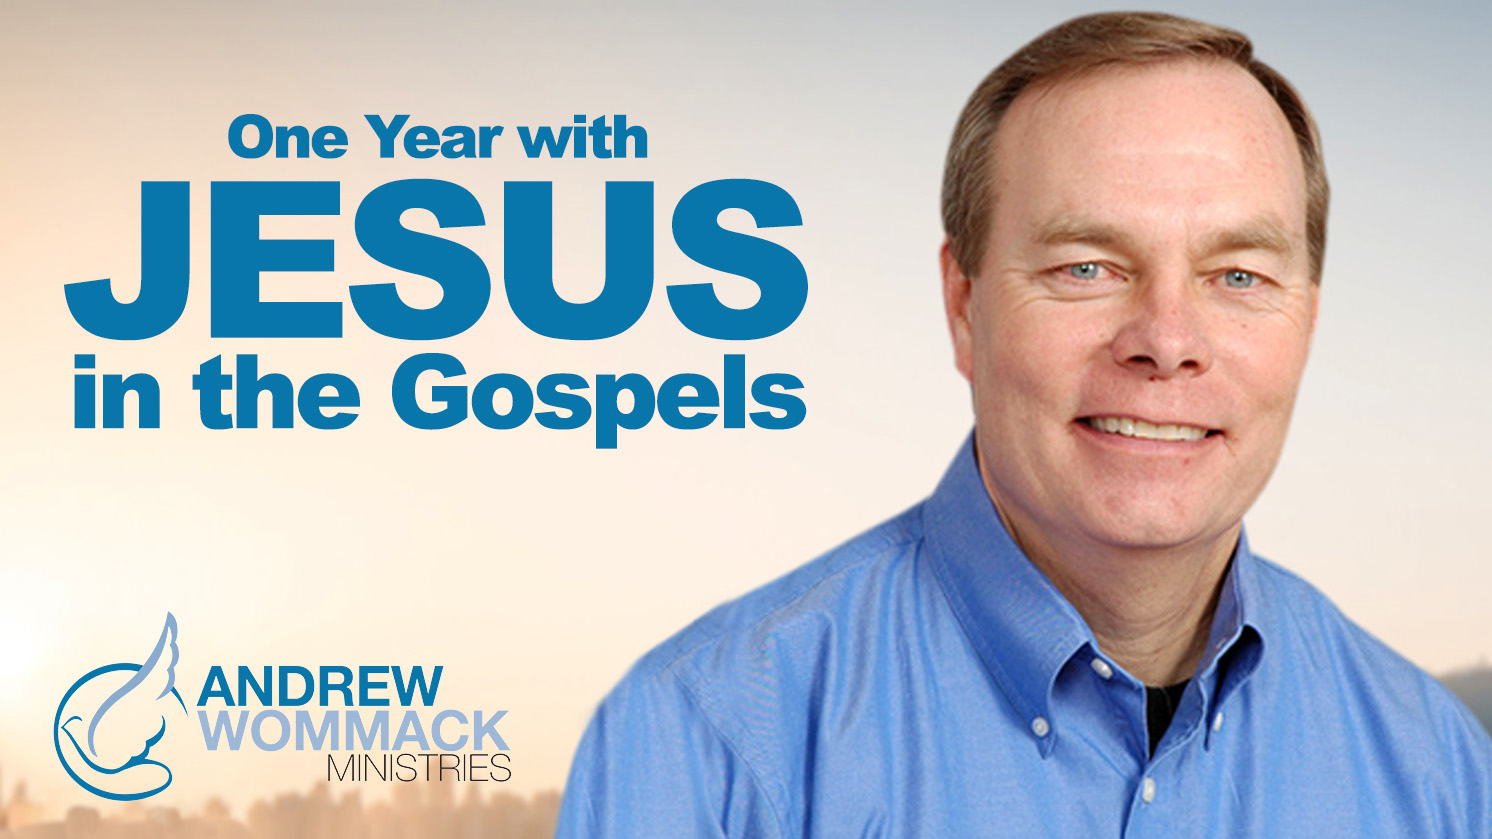 One Year with Jesus in the Gospels